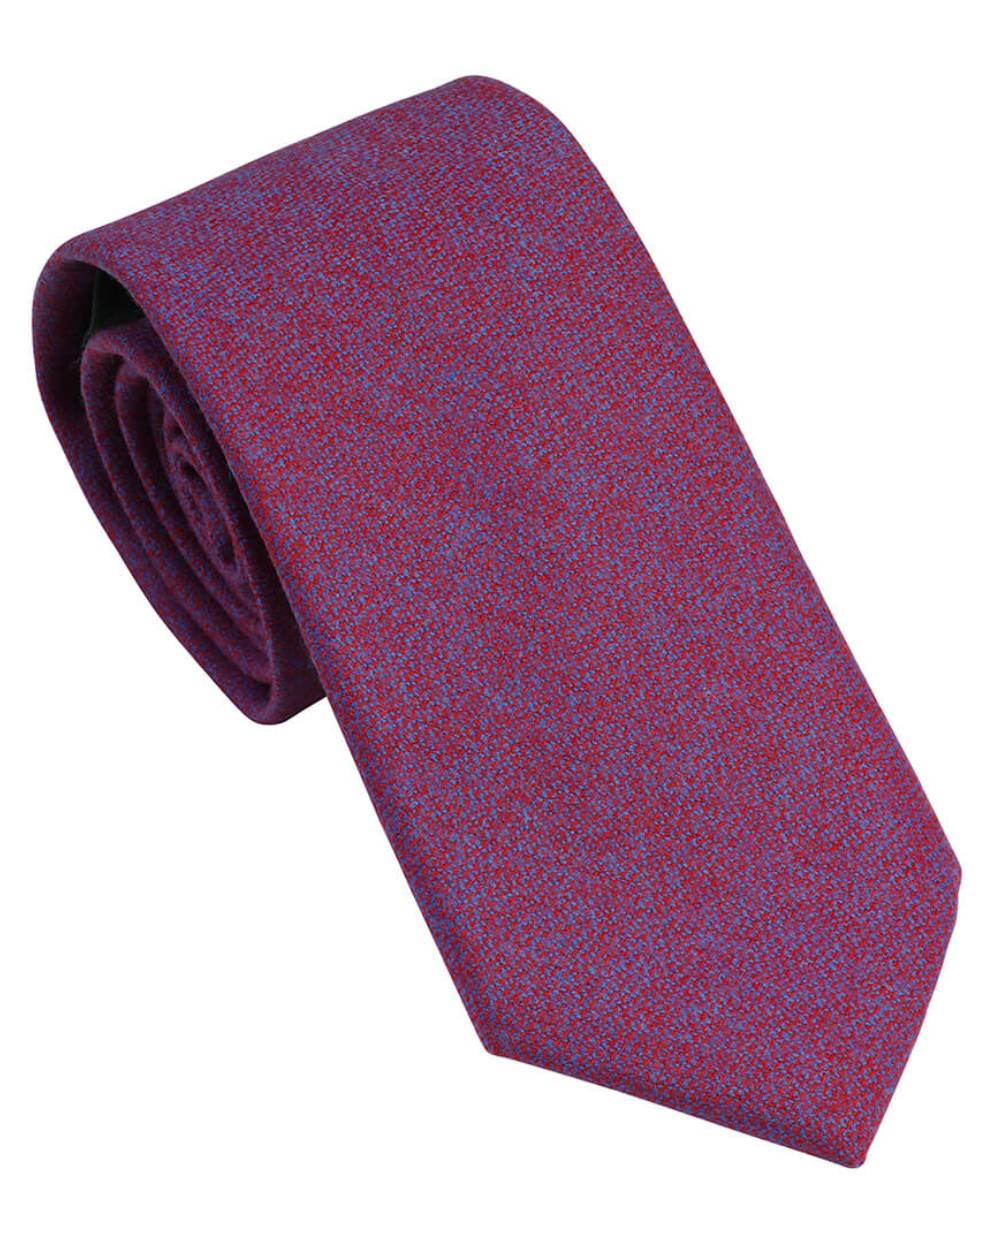 Old Red/Cornflower Coloured Laksen Celtic Tweed Tie On A White Background 